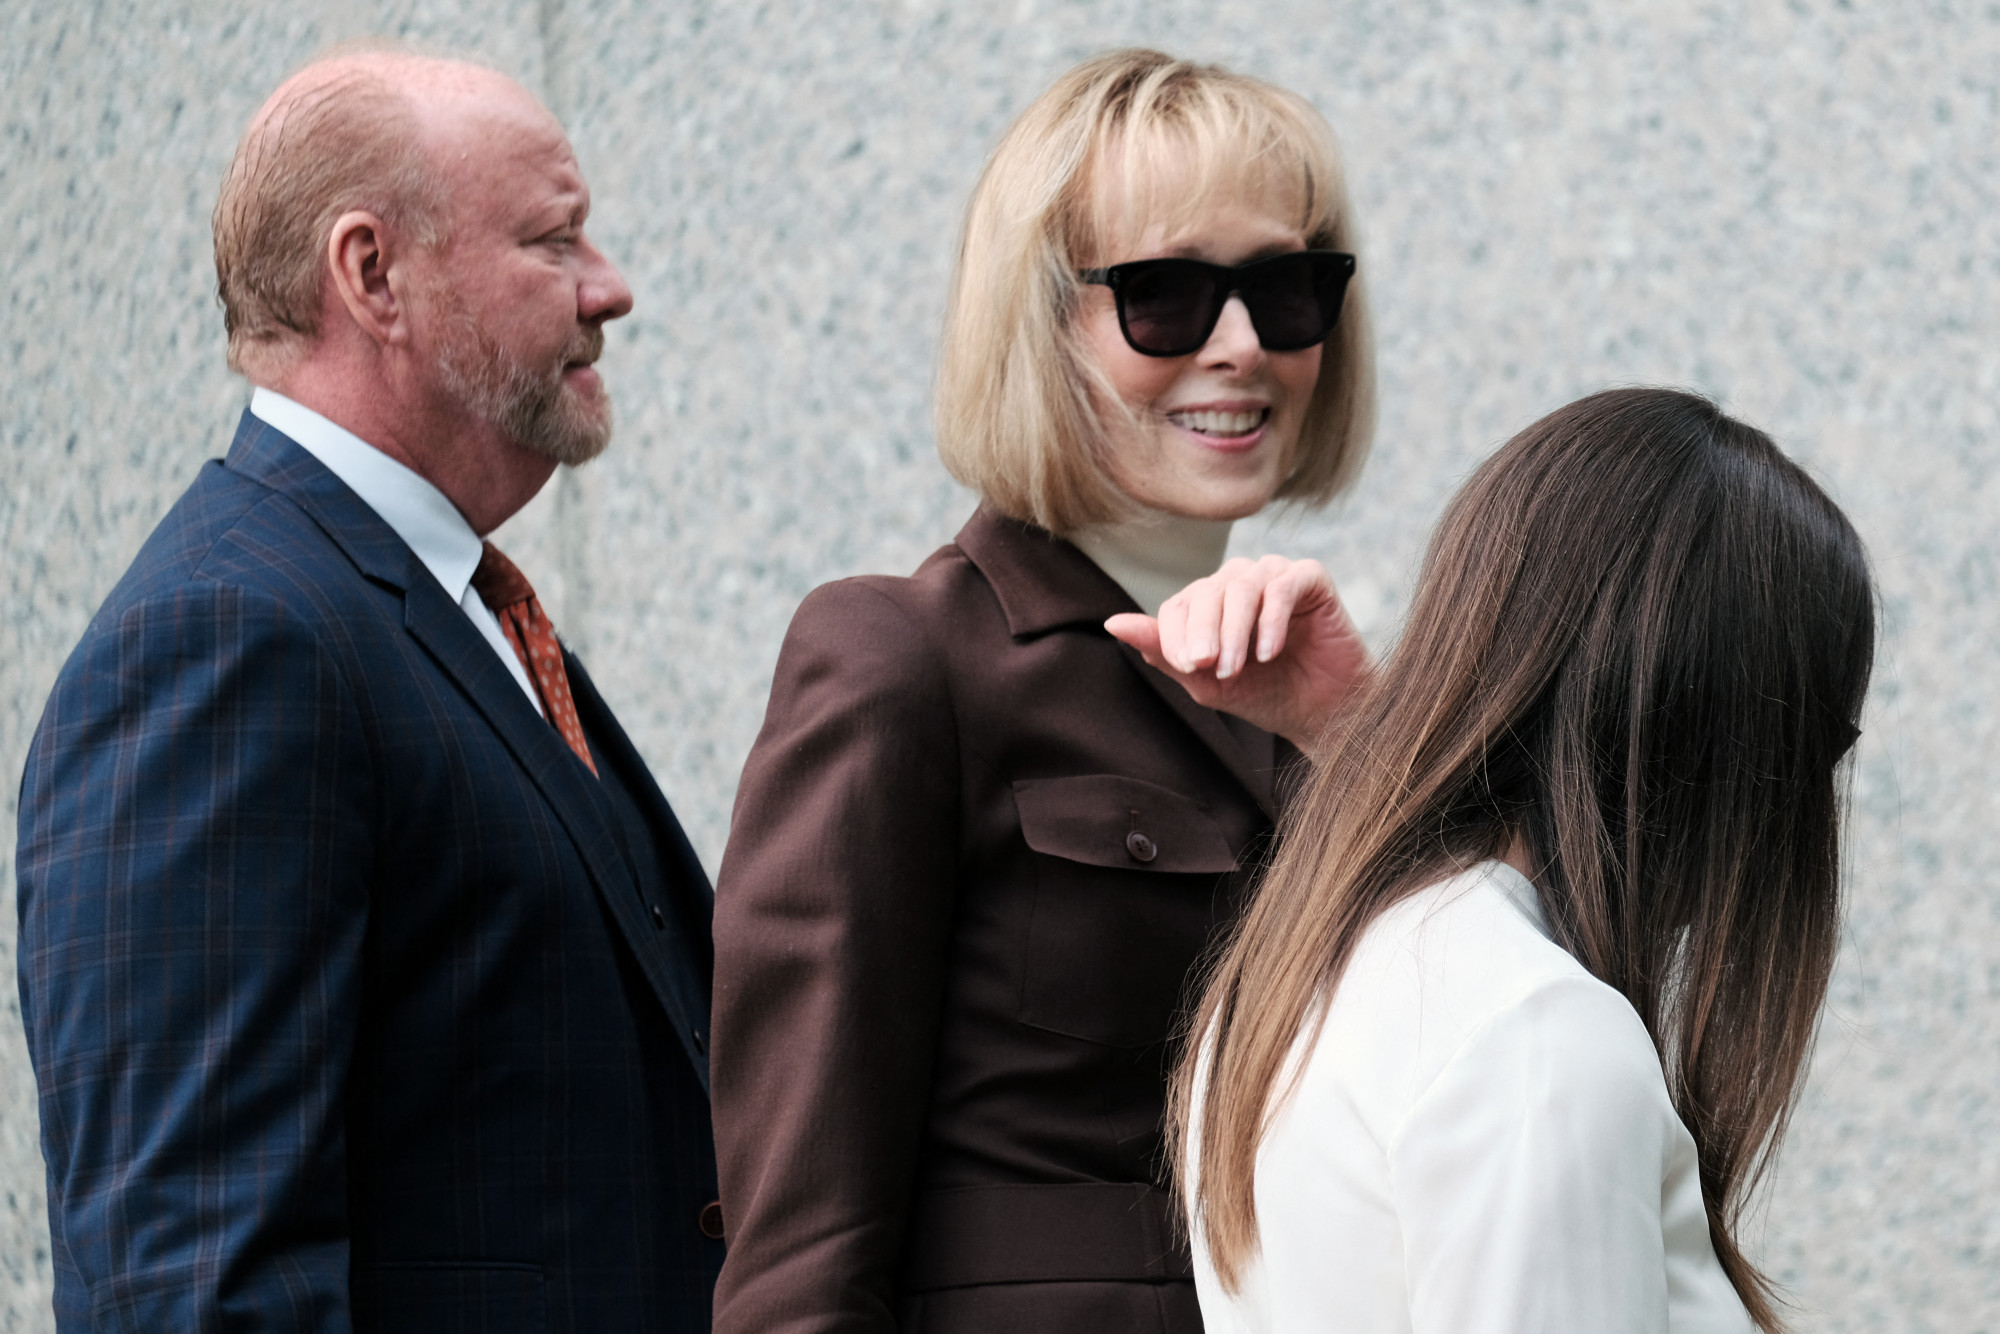 E. Jean Carroll in a New York court on May 9, 2023